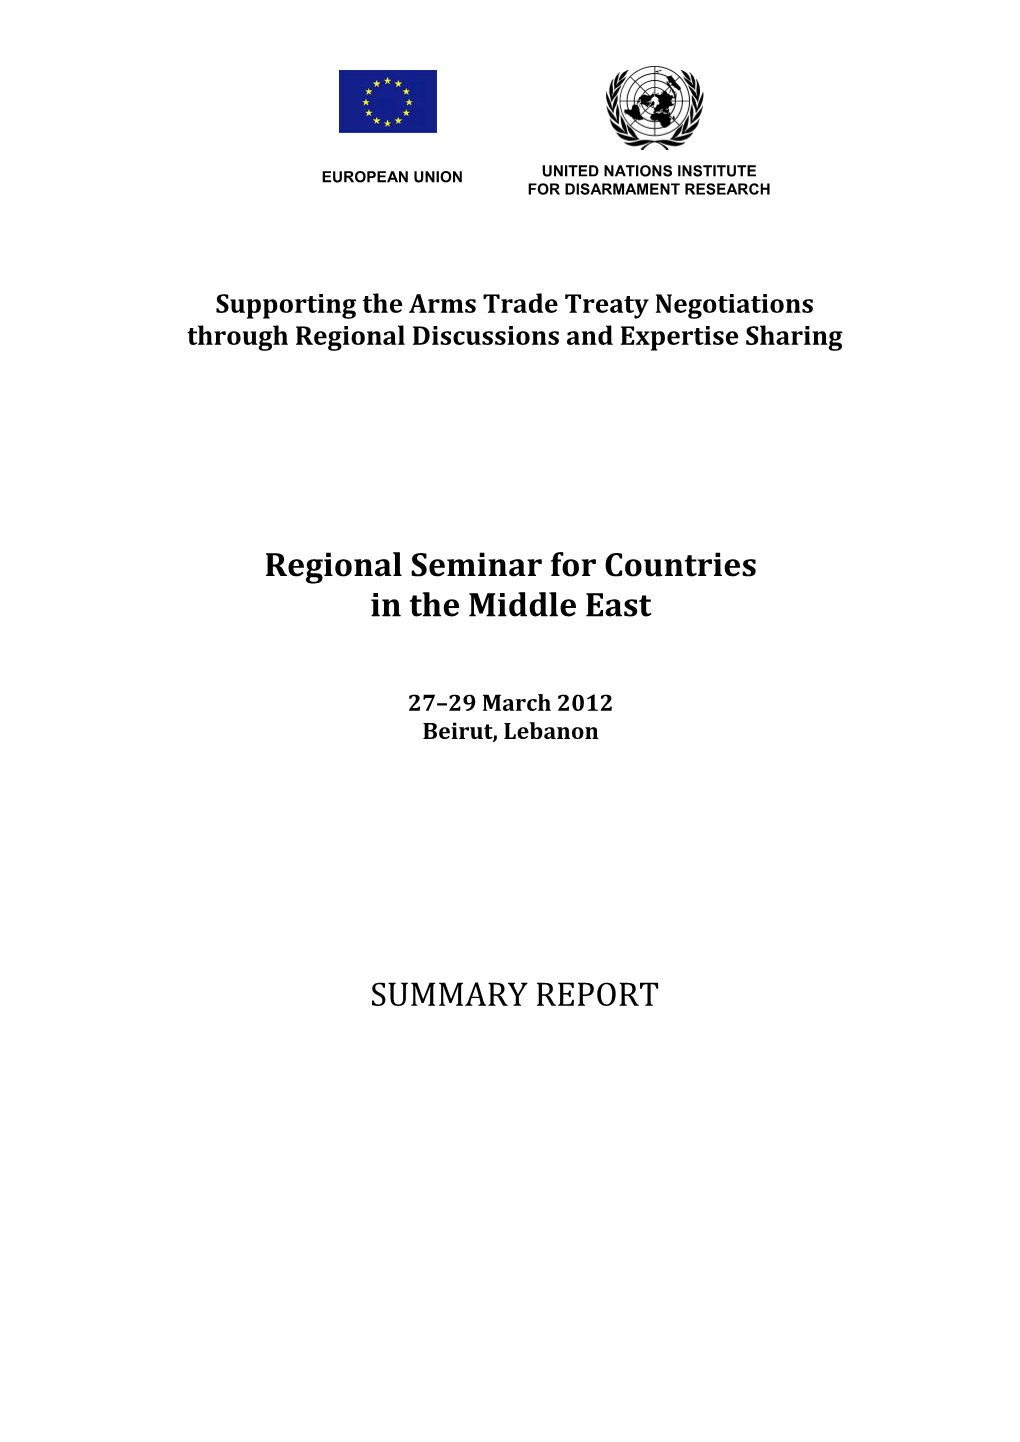 Regional Seminar for Countries in the Middle East SUMMARY REPORT